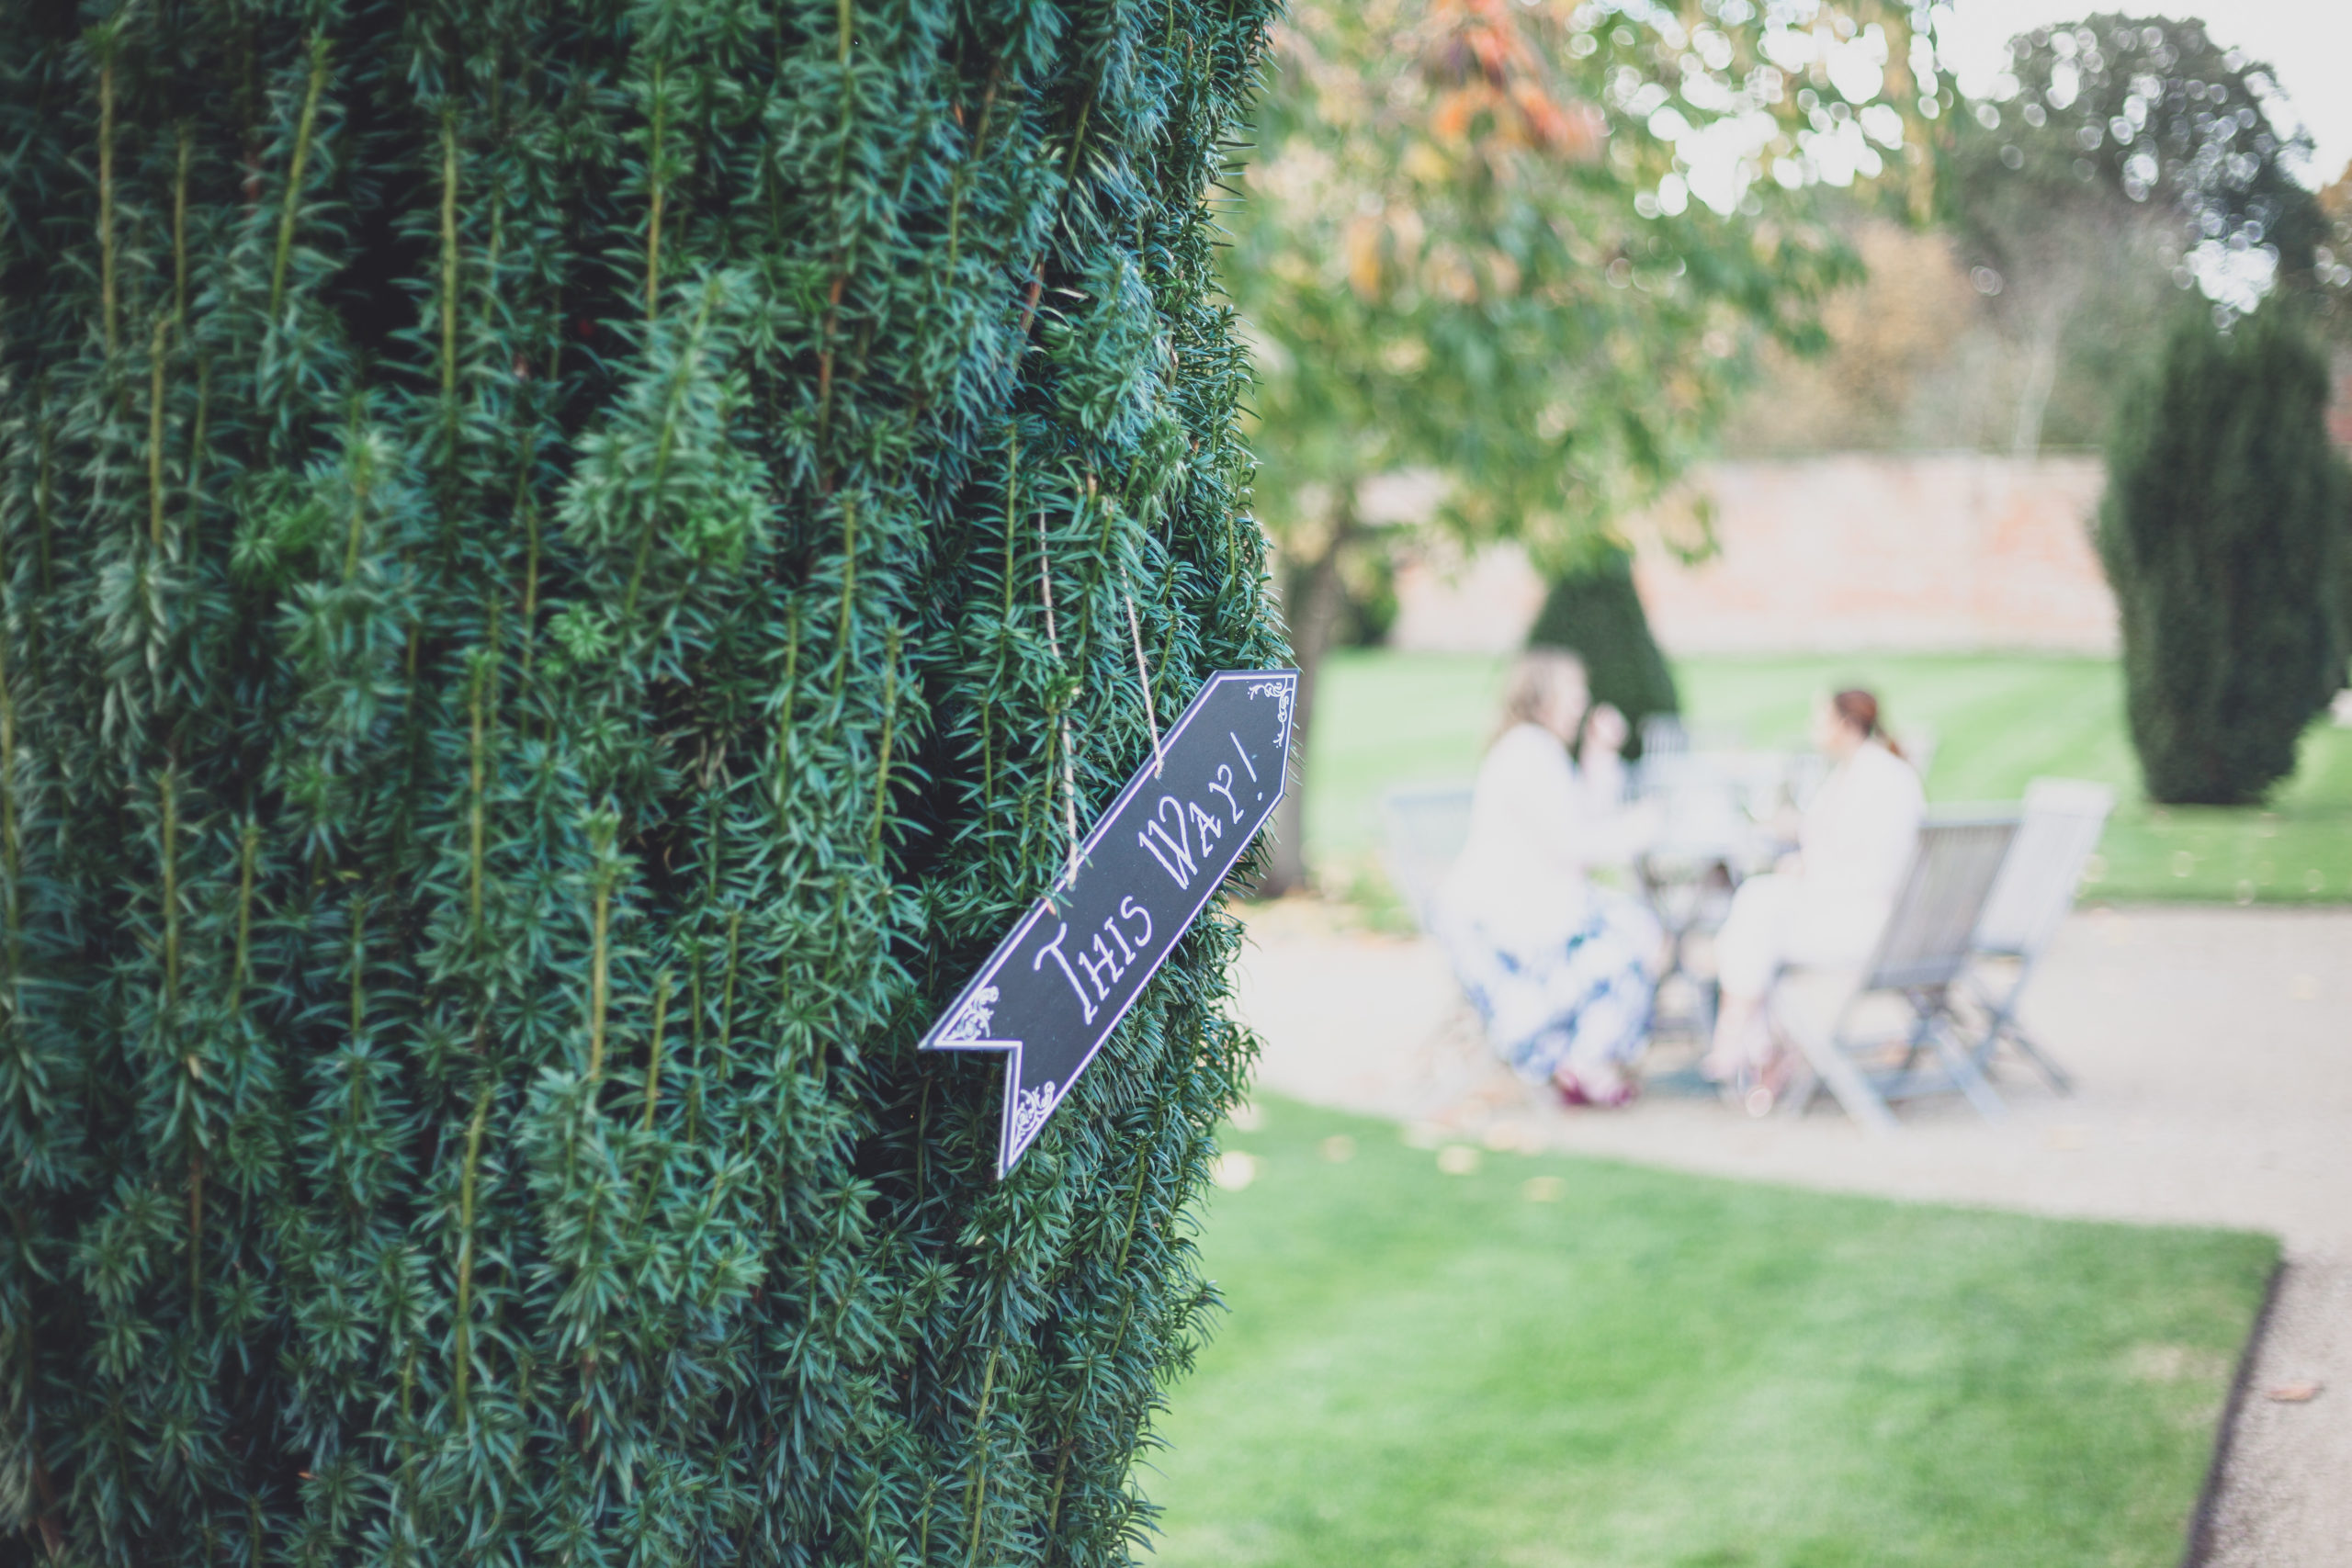 Outdoors wedding decor ideas at Combermere Abbey